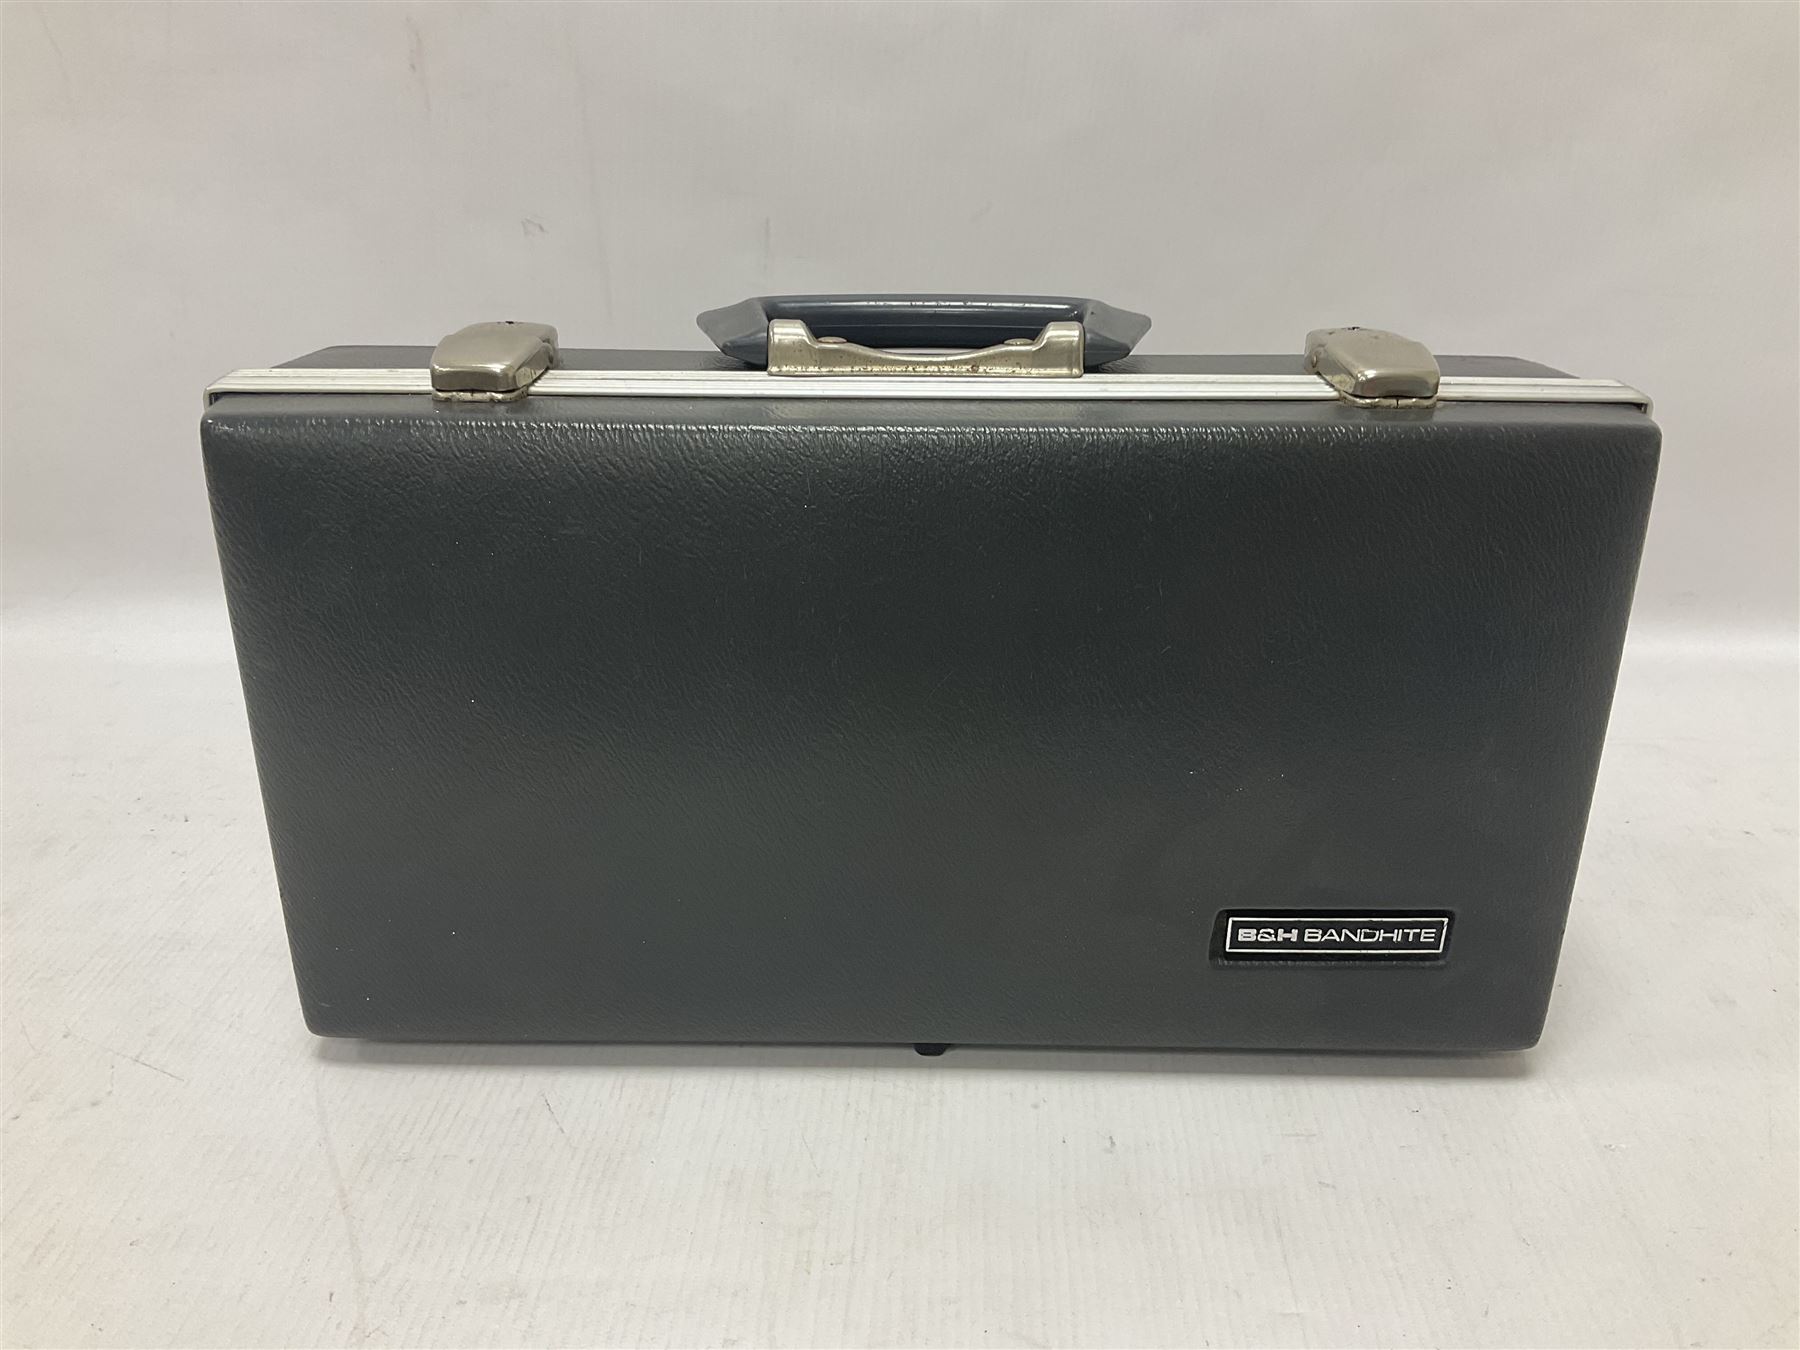 Boosey & Hawkes Regent B flat clarinet and accessories in a velvet lined fitted case - Image 19 of 19